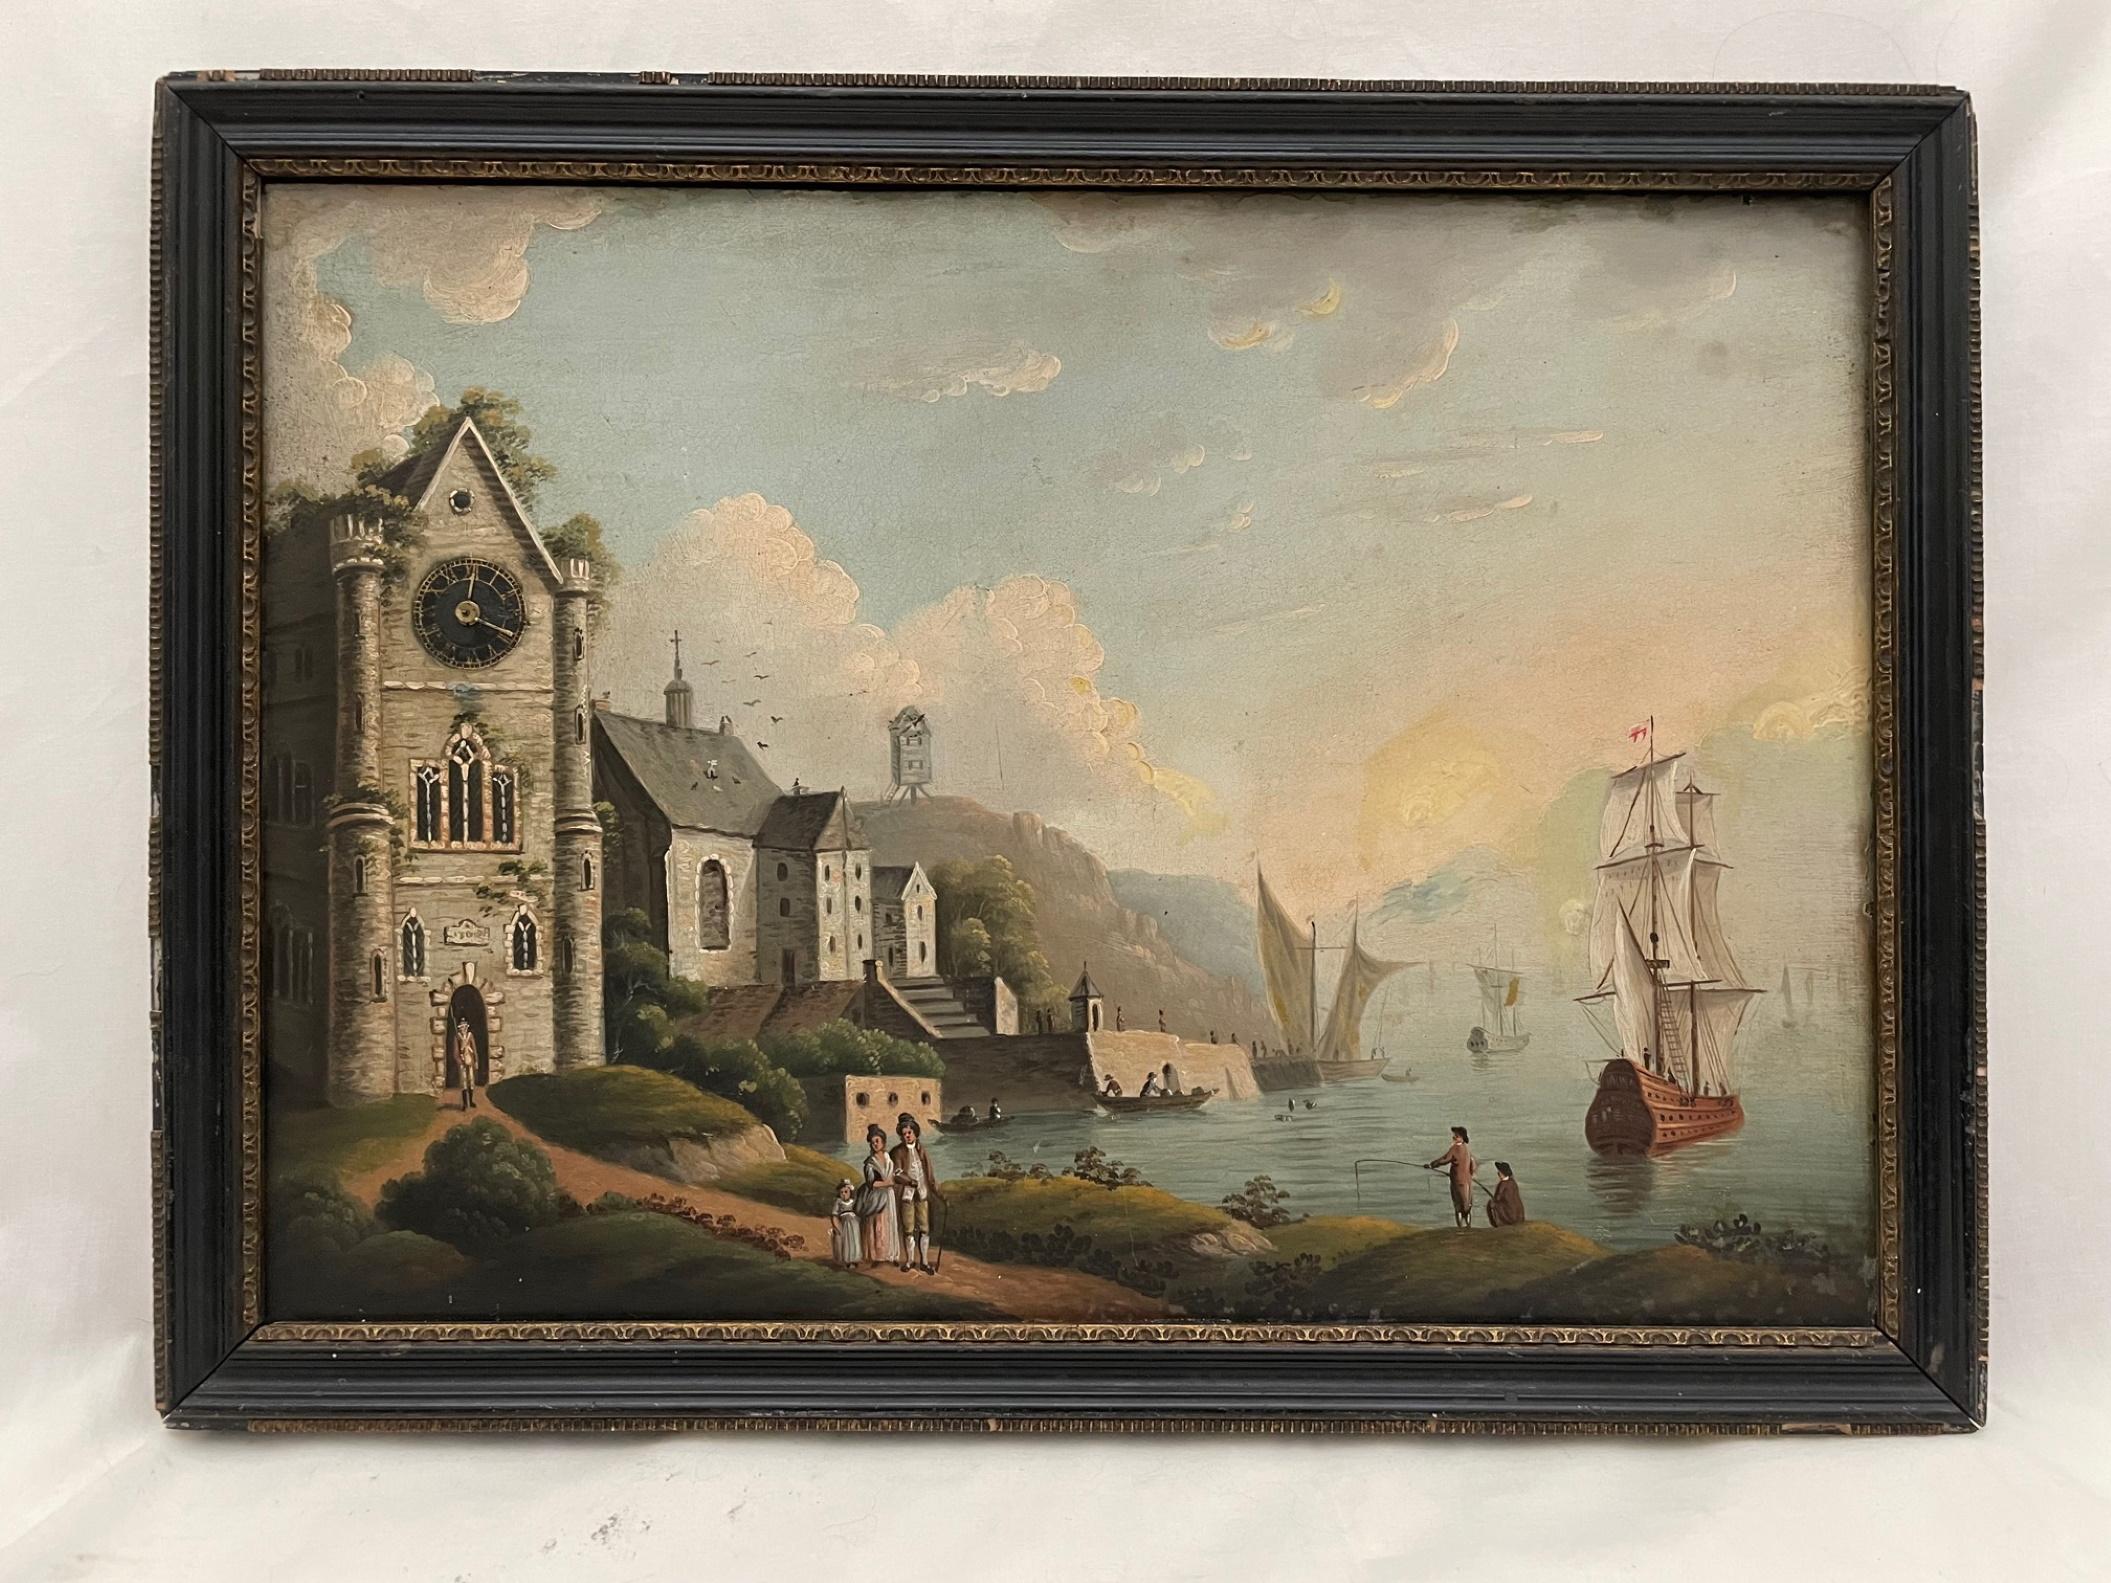 19th century Swiss mechanical clock painting circa 1820

This antique and unique clock painting is created in oil on metal circa 1820 in Switzerland. This clock painting is an exceptional example of the genre. The painting depicts a lake in a